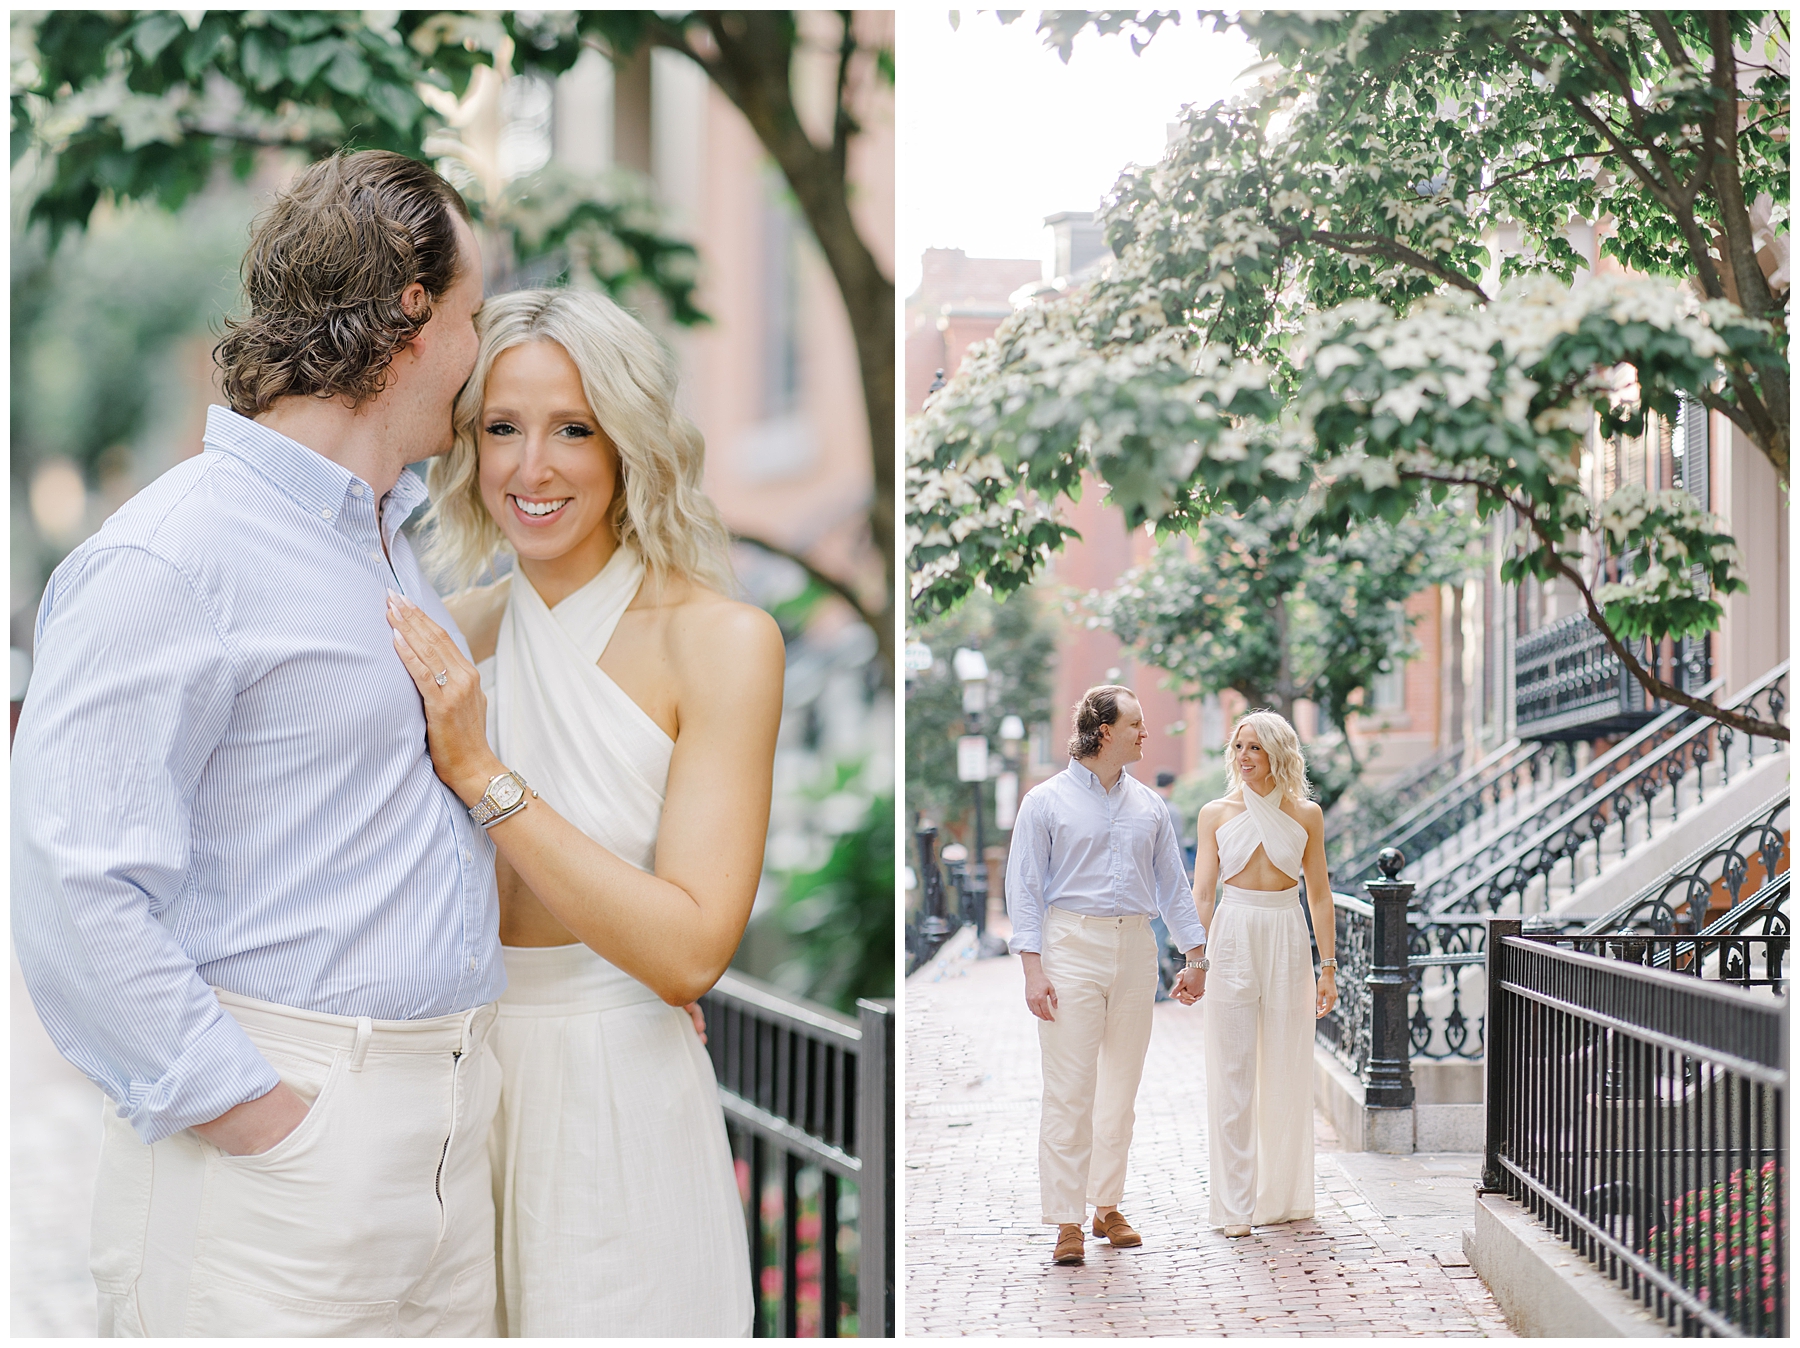 Romantic engagement session by Boston engagement photographer Stephanie Berenson Photography